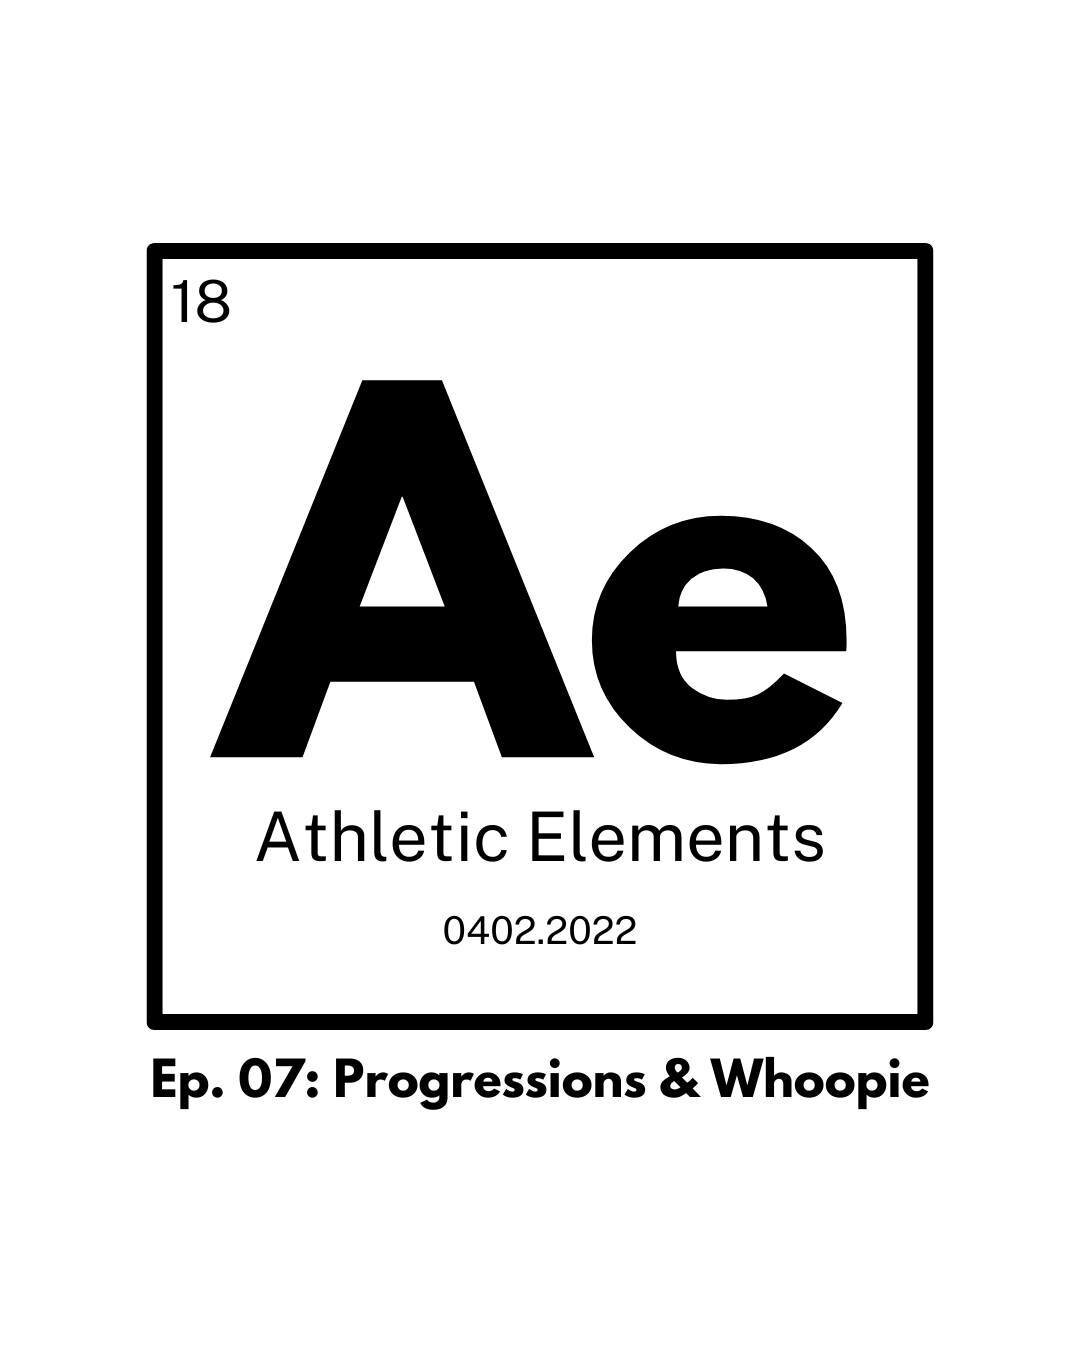 Episode 7 is coming.⁠
⁠
*A few recent PR's in the gym⁠
*Programming and progressions⁠
*Why basics will always matter⁠
*VBT &amp; Wearables⁠
⁠
⁠
#athleticelementspodcast #moranacademy #newpodcast #weightlifting #powerlifting #strengthsportsforall @man